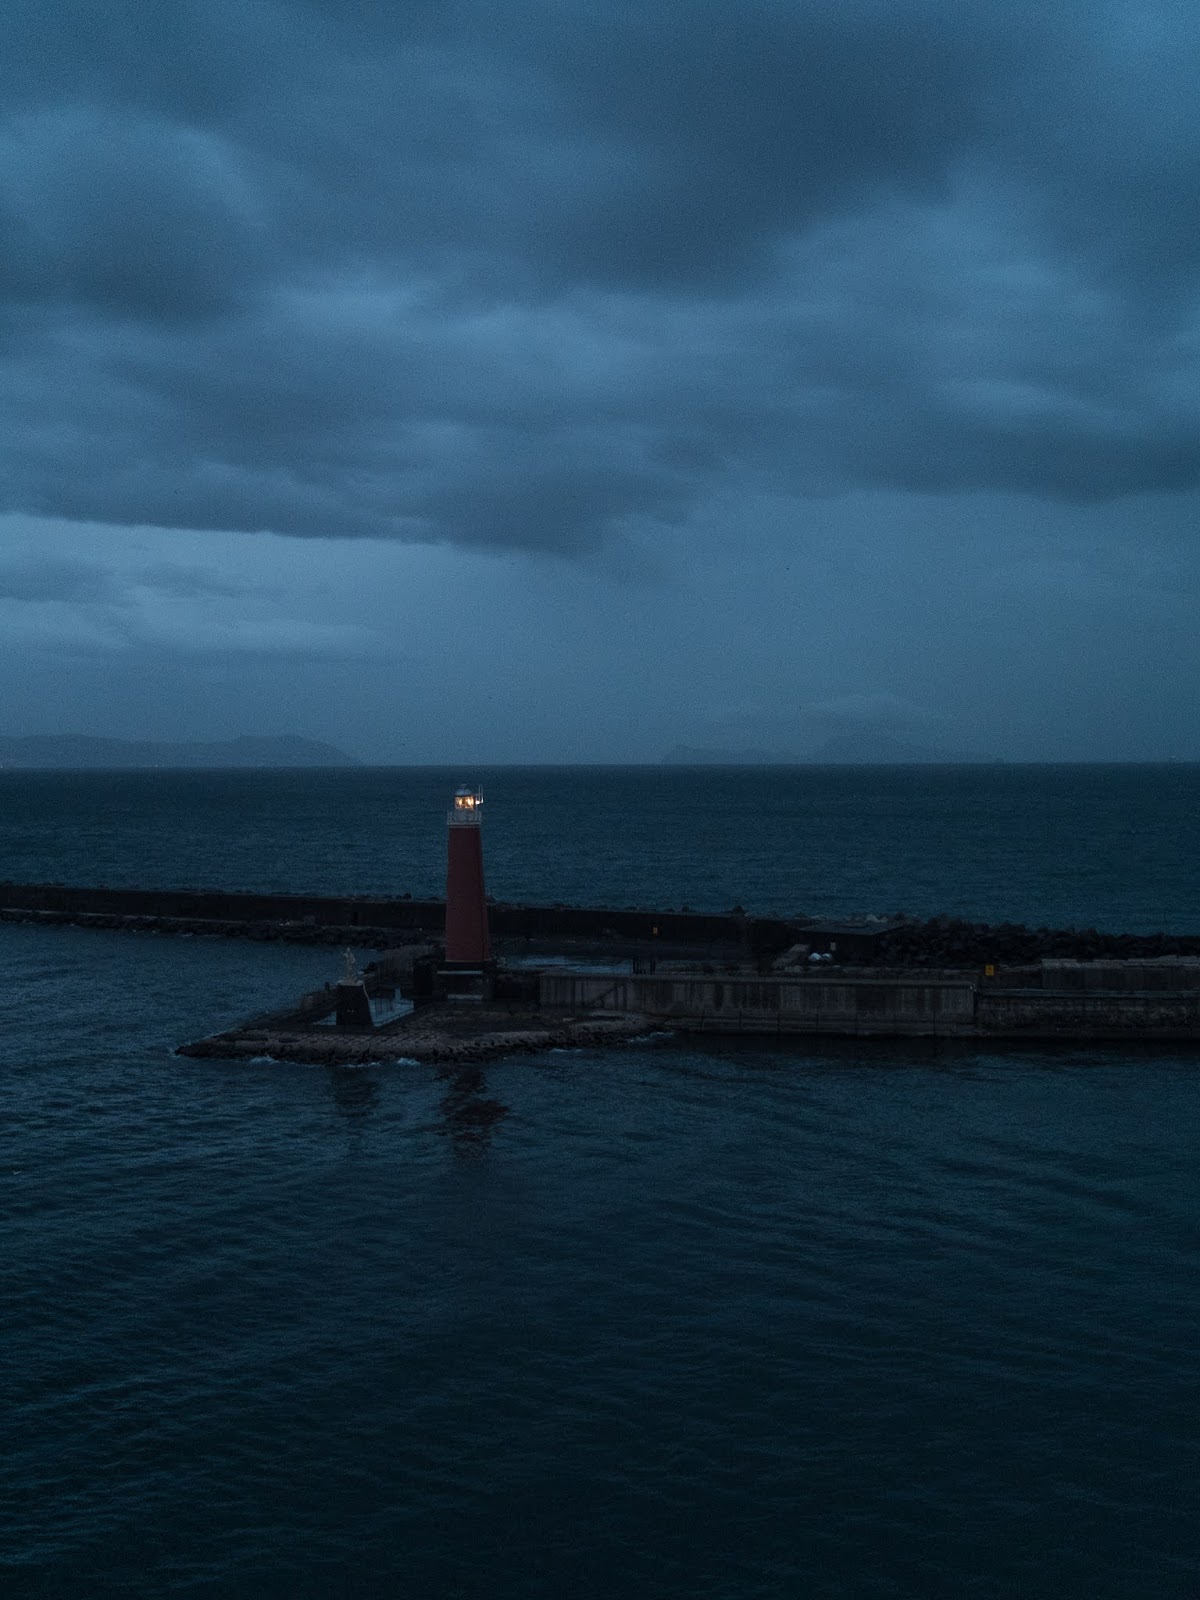 The lighthouse on Molo di San Vincenzo in the port of Naples at dawn